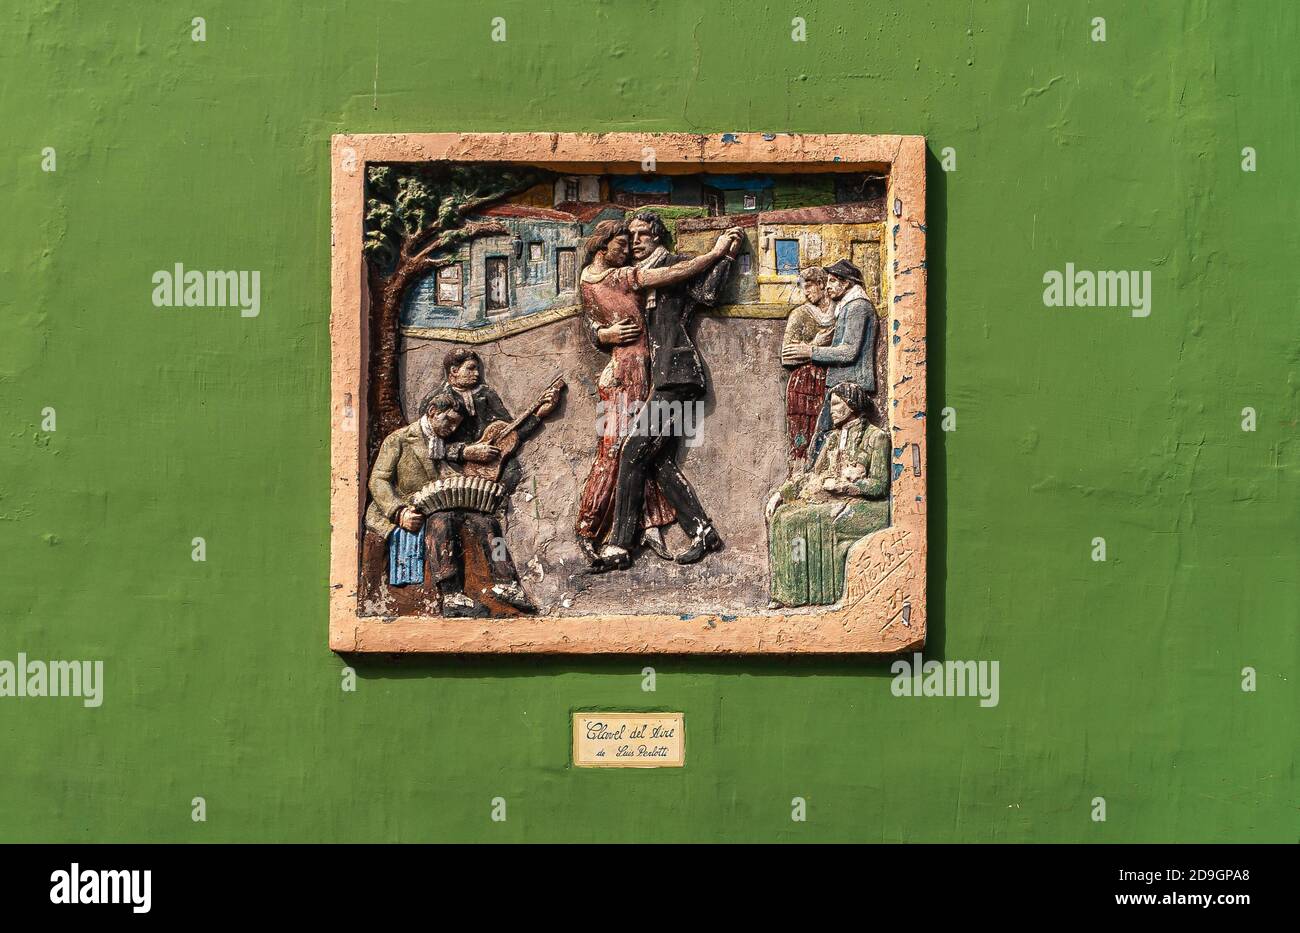 https://c8.alamy.com/comp/2D9GPA8/buenos-aires-argentina-december-19-2008-la-boca-neighborhood-colored-fresco-of-tango-dancing-couple-and-musicians-set-in-olive-green-wall-in-stre-2D9GPA8.jpg